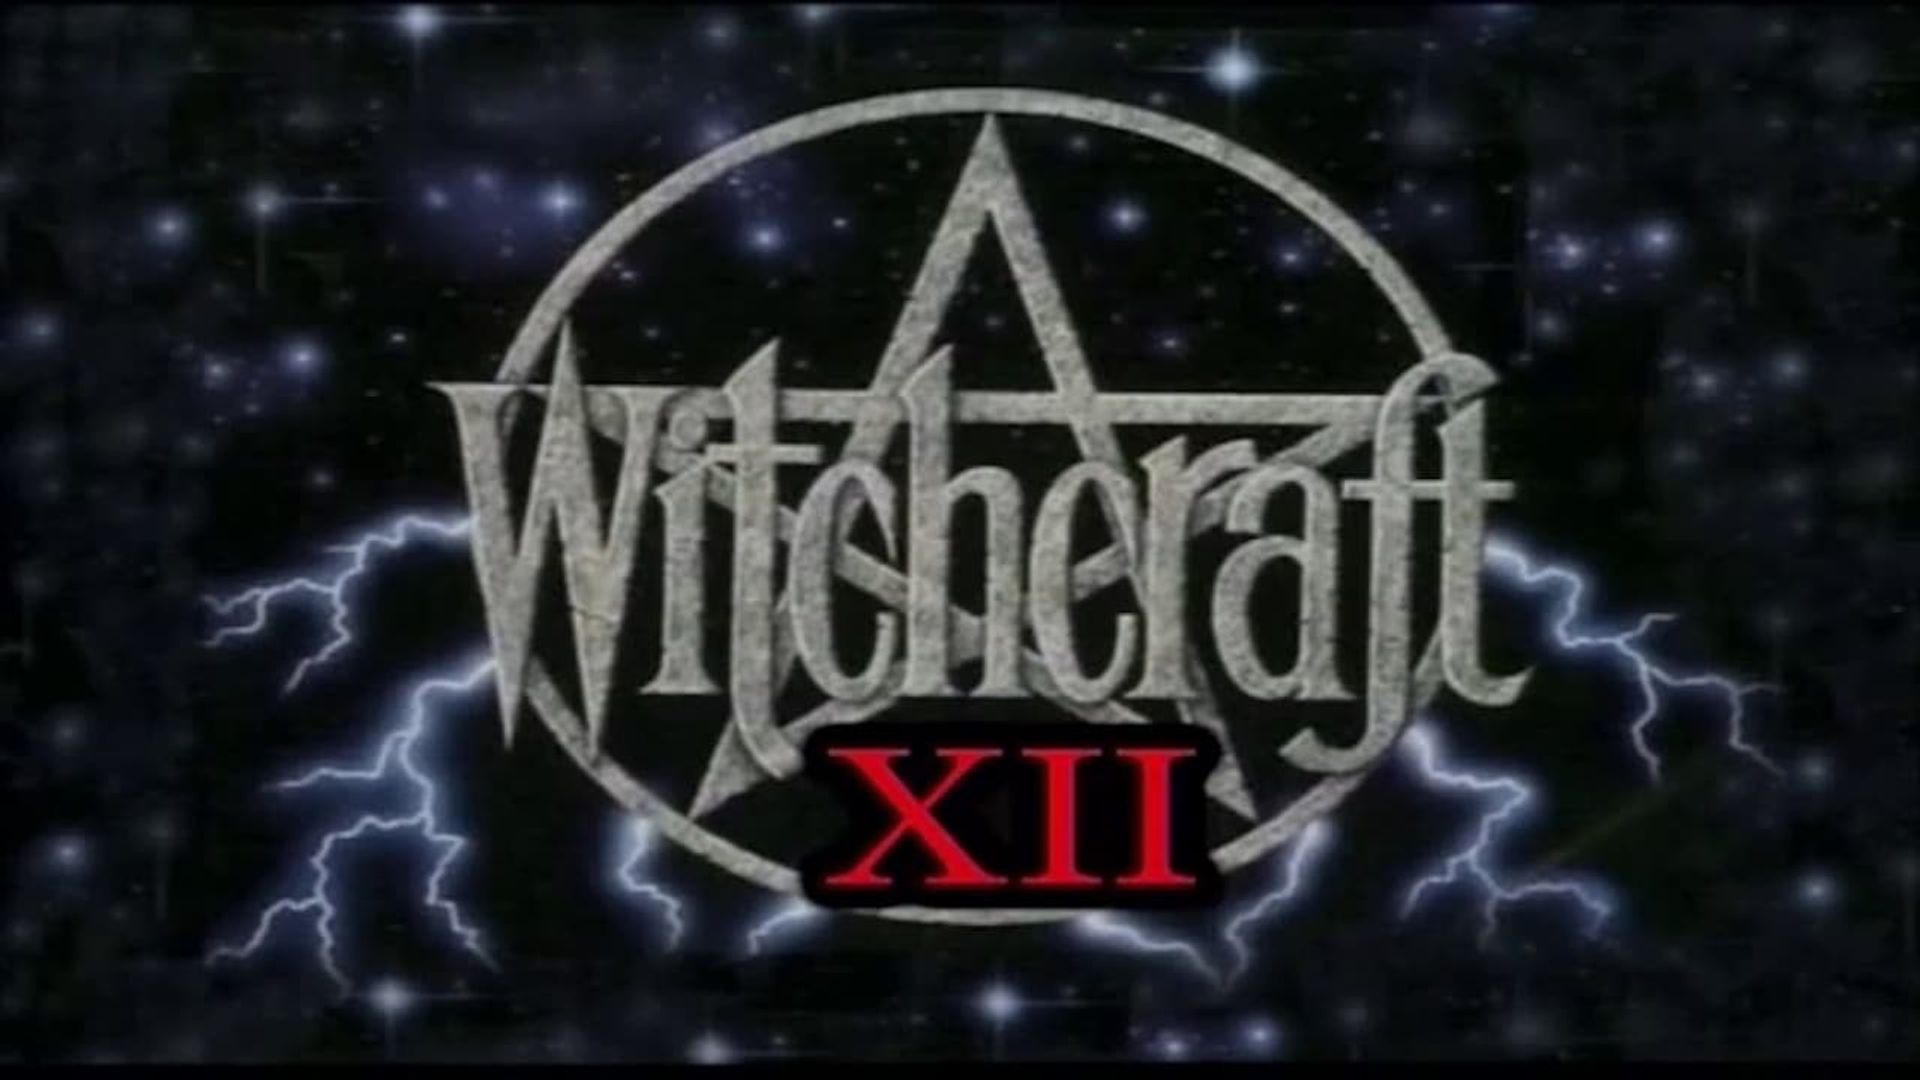 Witchcraft XII: In the Lair of the Serpent background